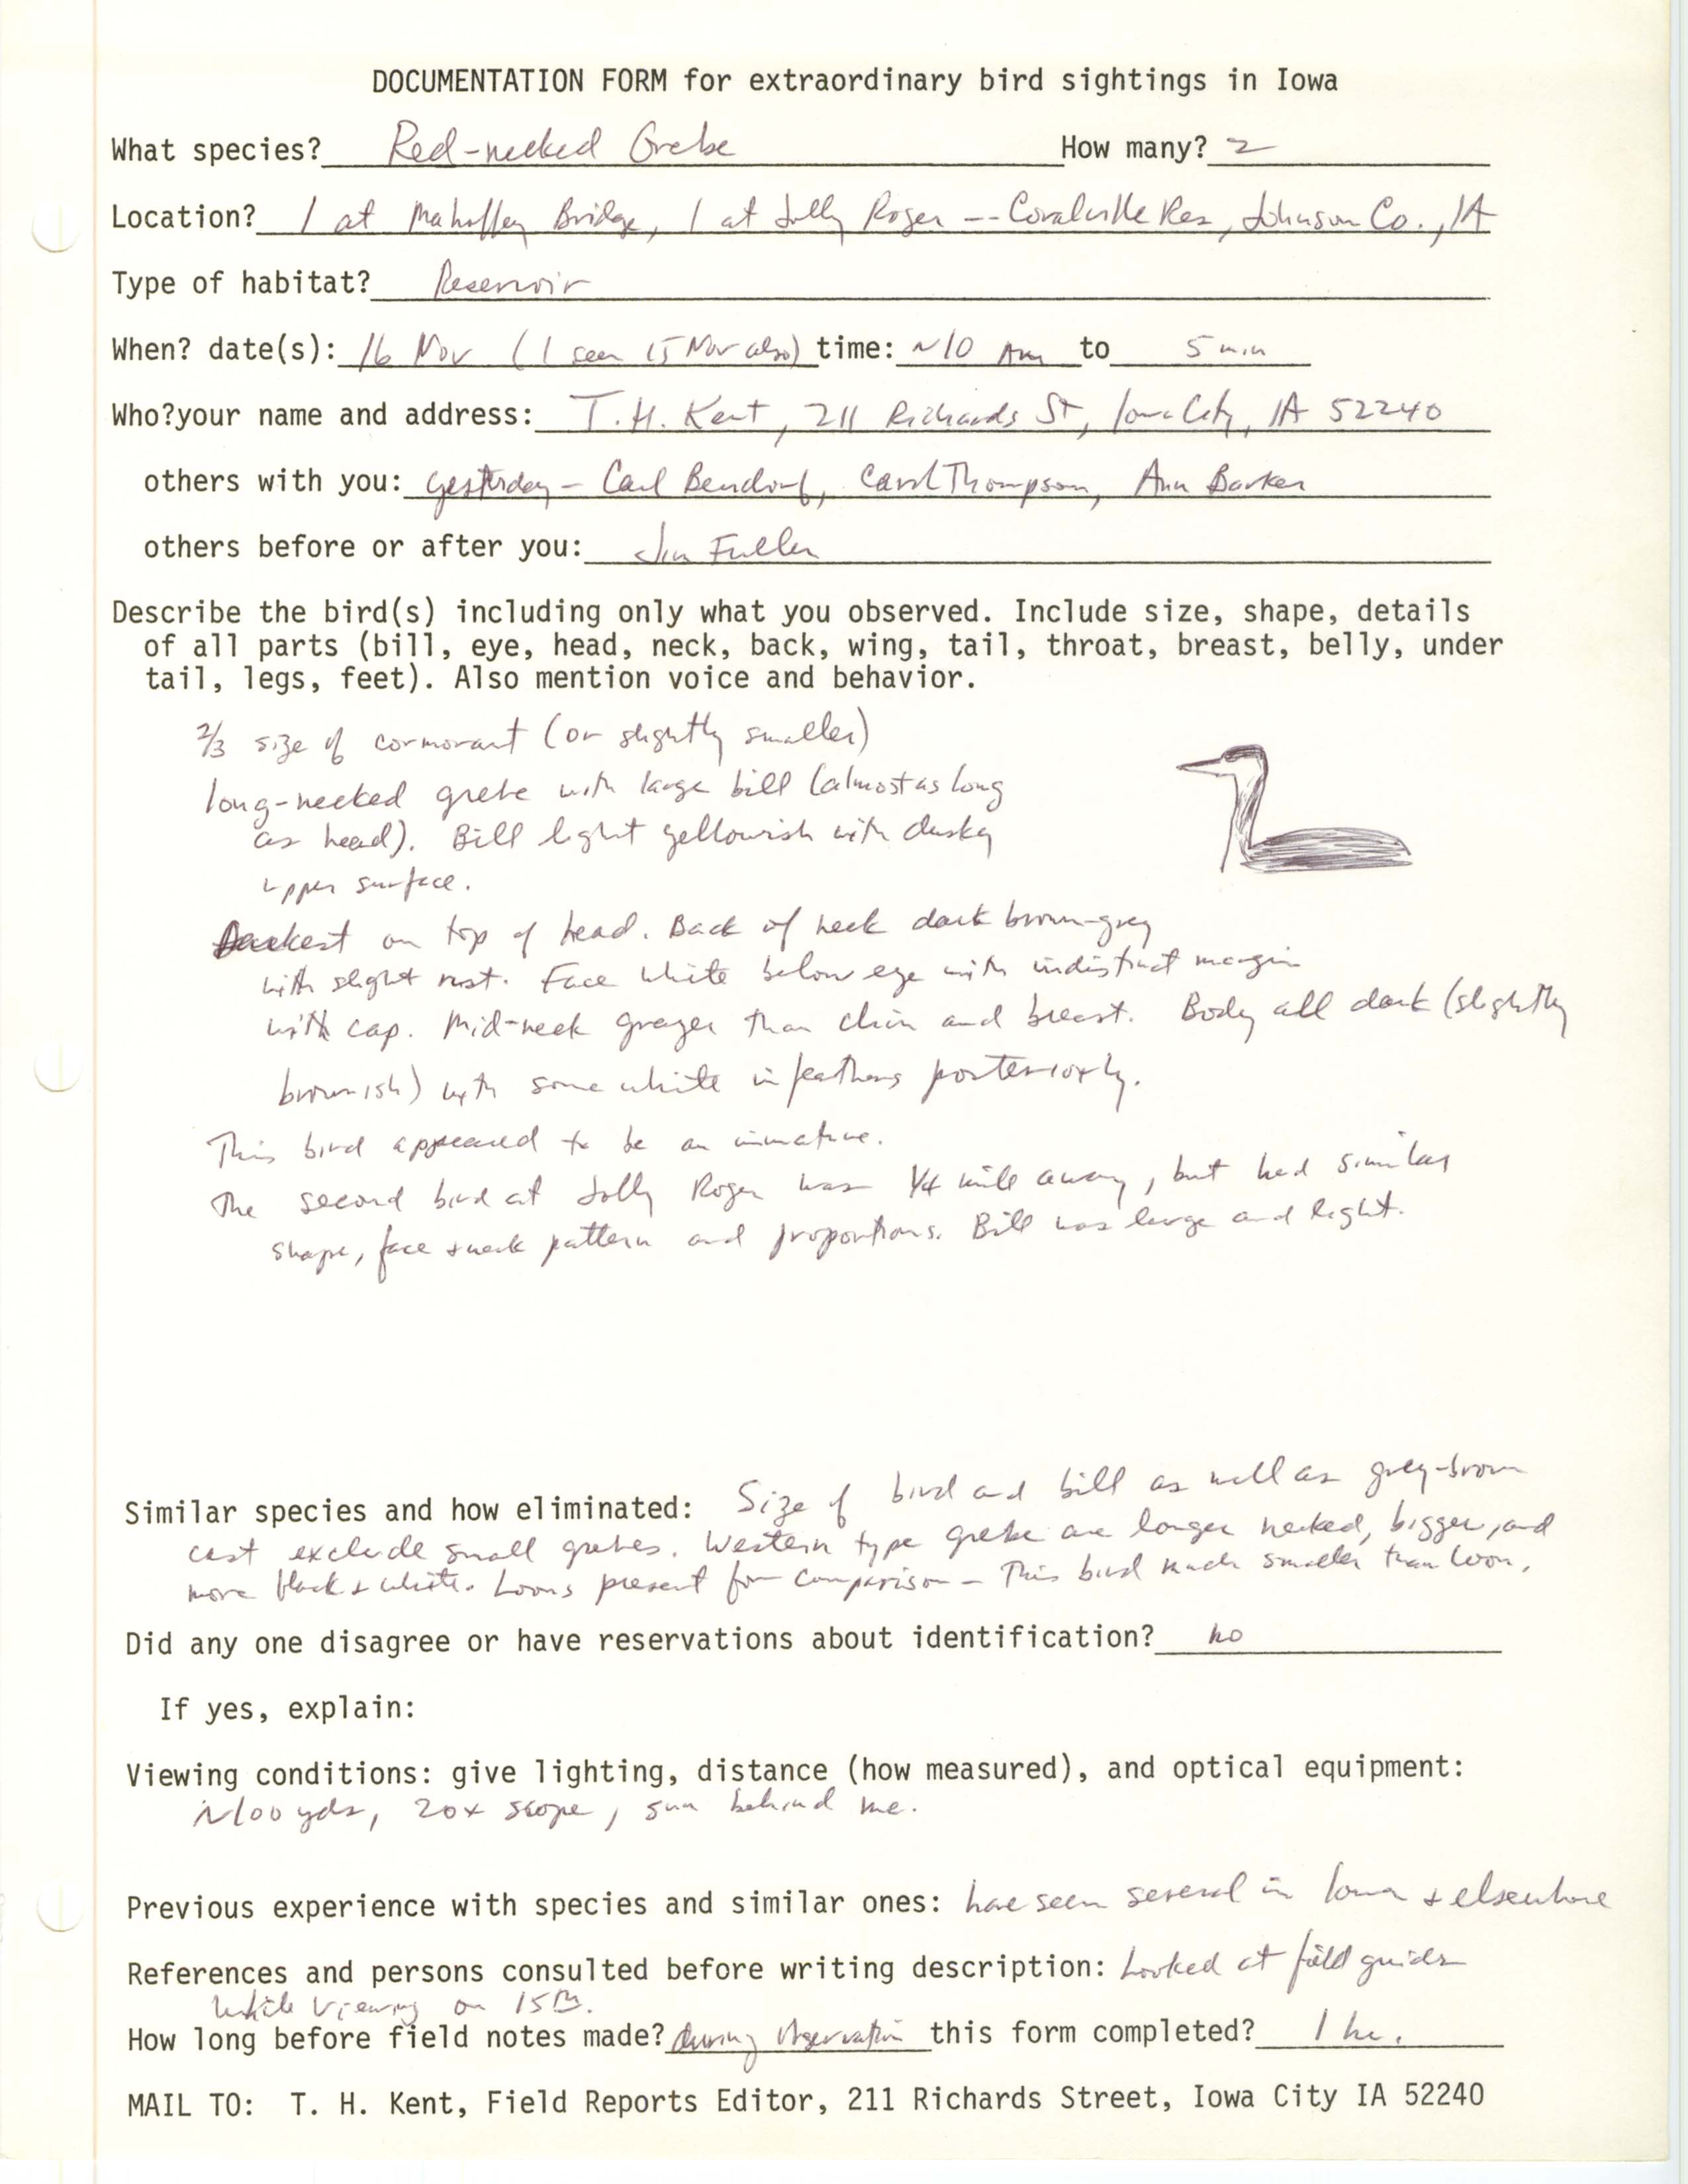 Rare bird documentation form for Red-necked Grebe at Coralville Reservoir, 1986